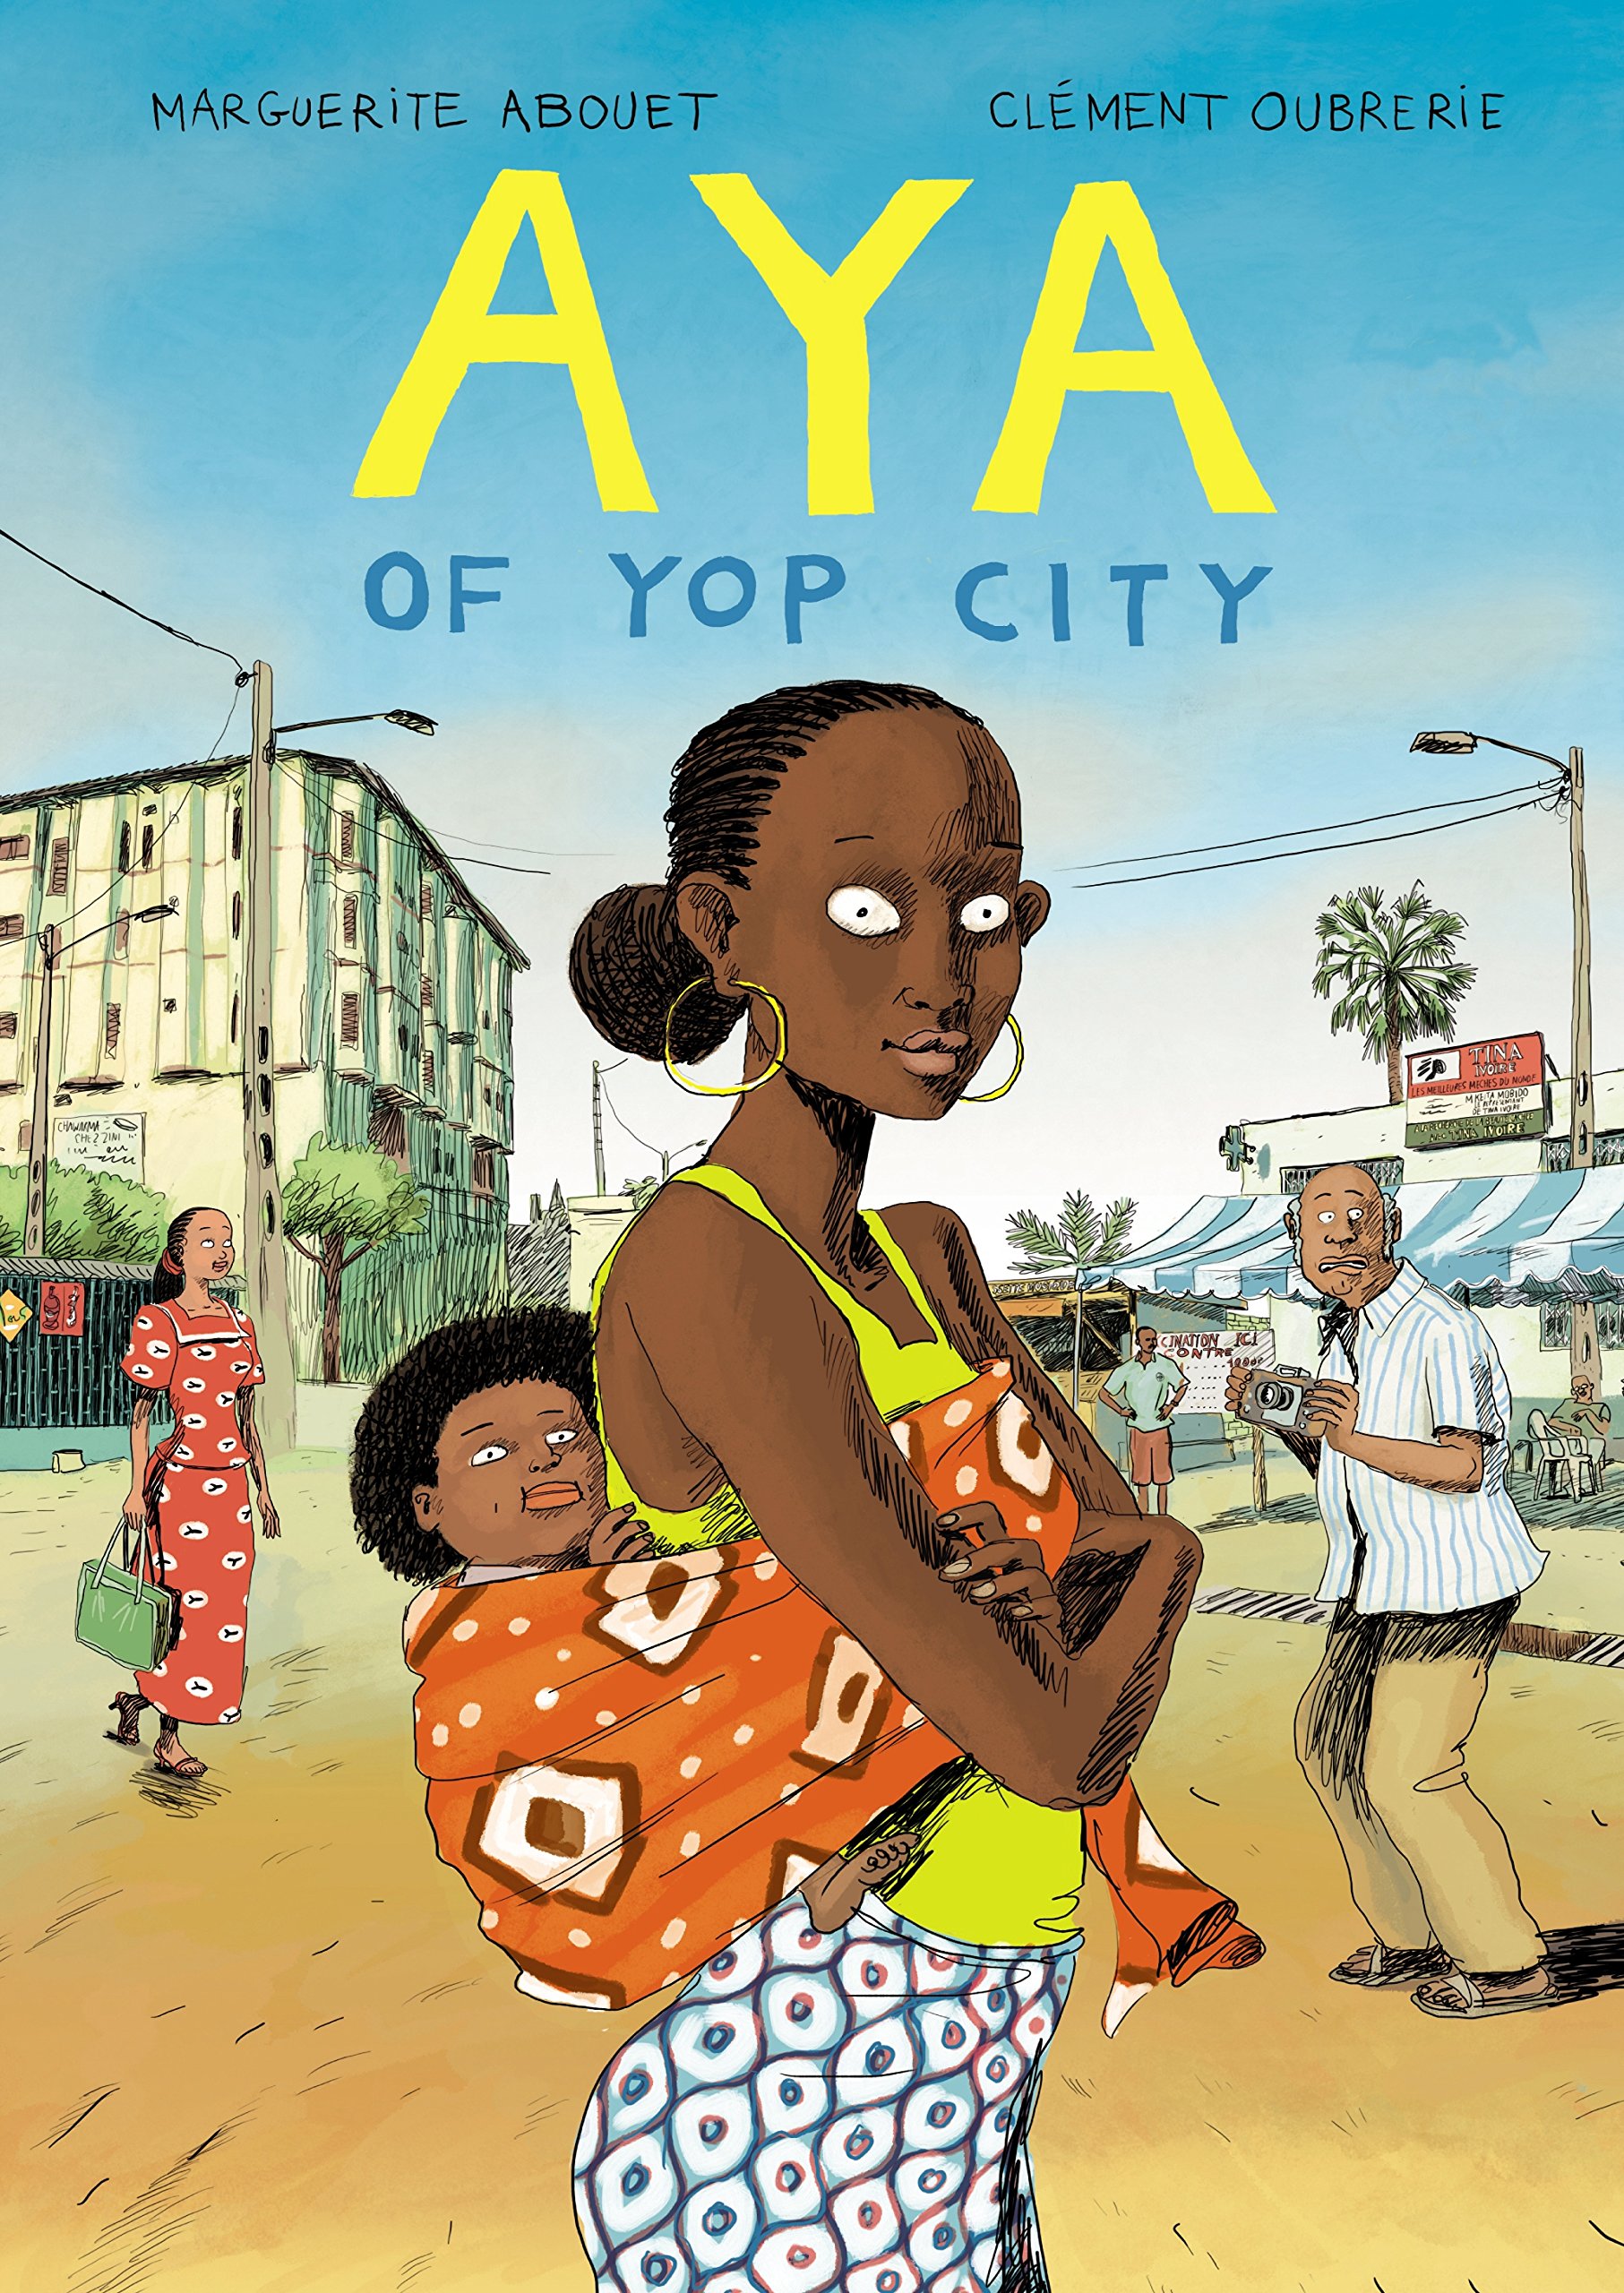 Book Cover Aya of Yop City. Marguerite Abouet, Clment Oubrerie